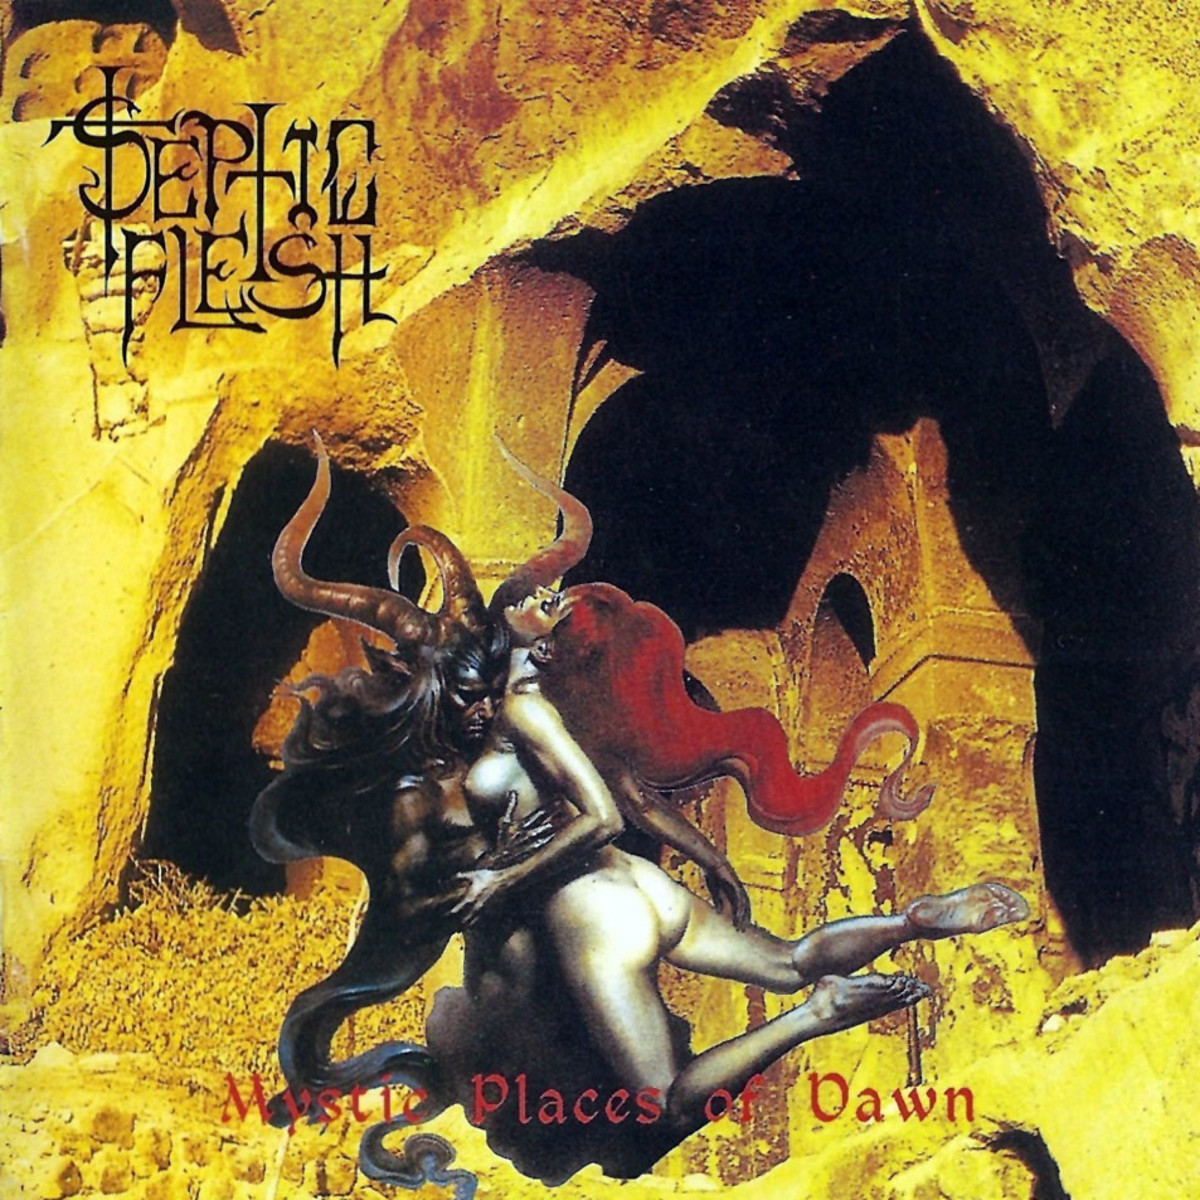 Review: Mystic Places of Dawn by Greek Death Metal Band Septic Flesh